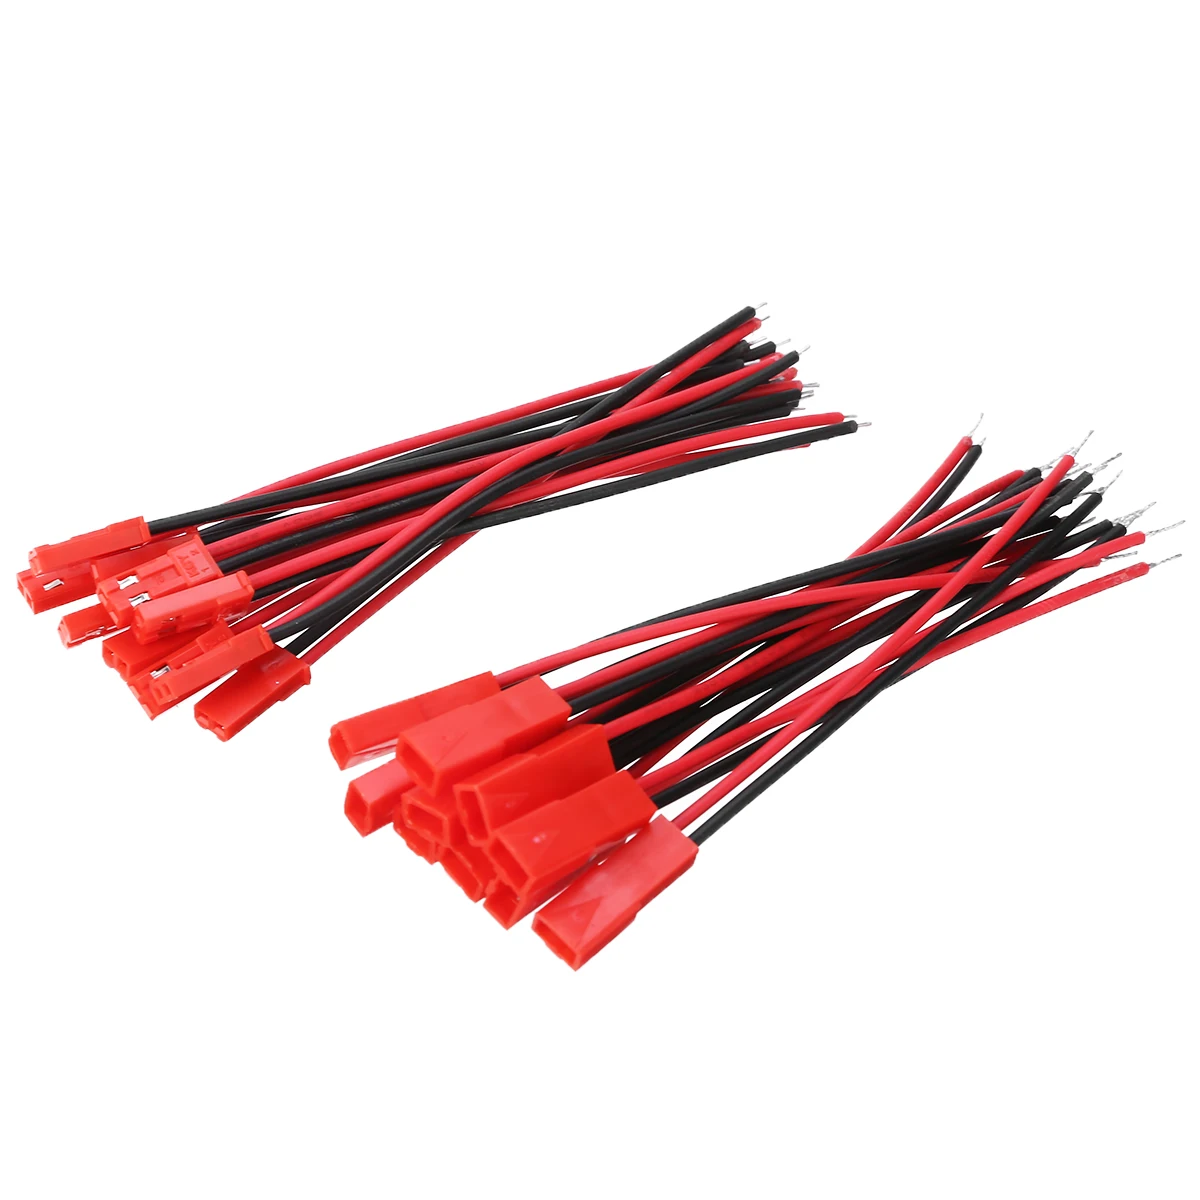 20pcs 2 Pin Connector Male Female JST Plug Cable 22 AWG Wire For RC Ba_lp 